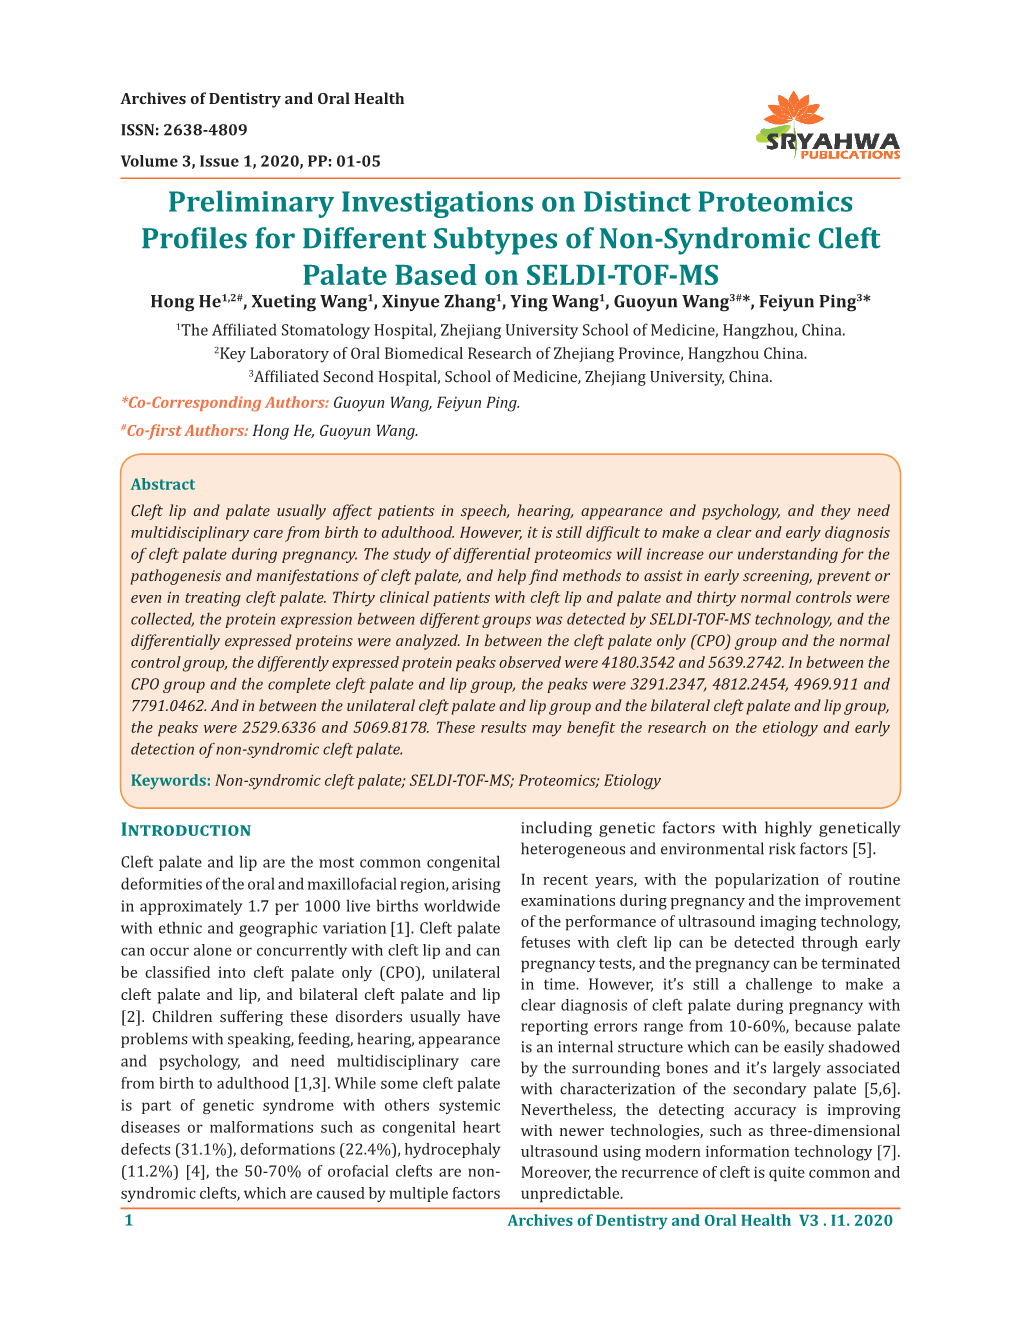 Preliminary Investigations on Distinct Proteomics Profiles for Different Subtypes of Non-Syndromic Cleft Palate Based on SELDI-T